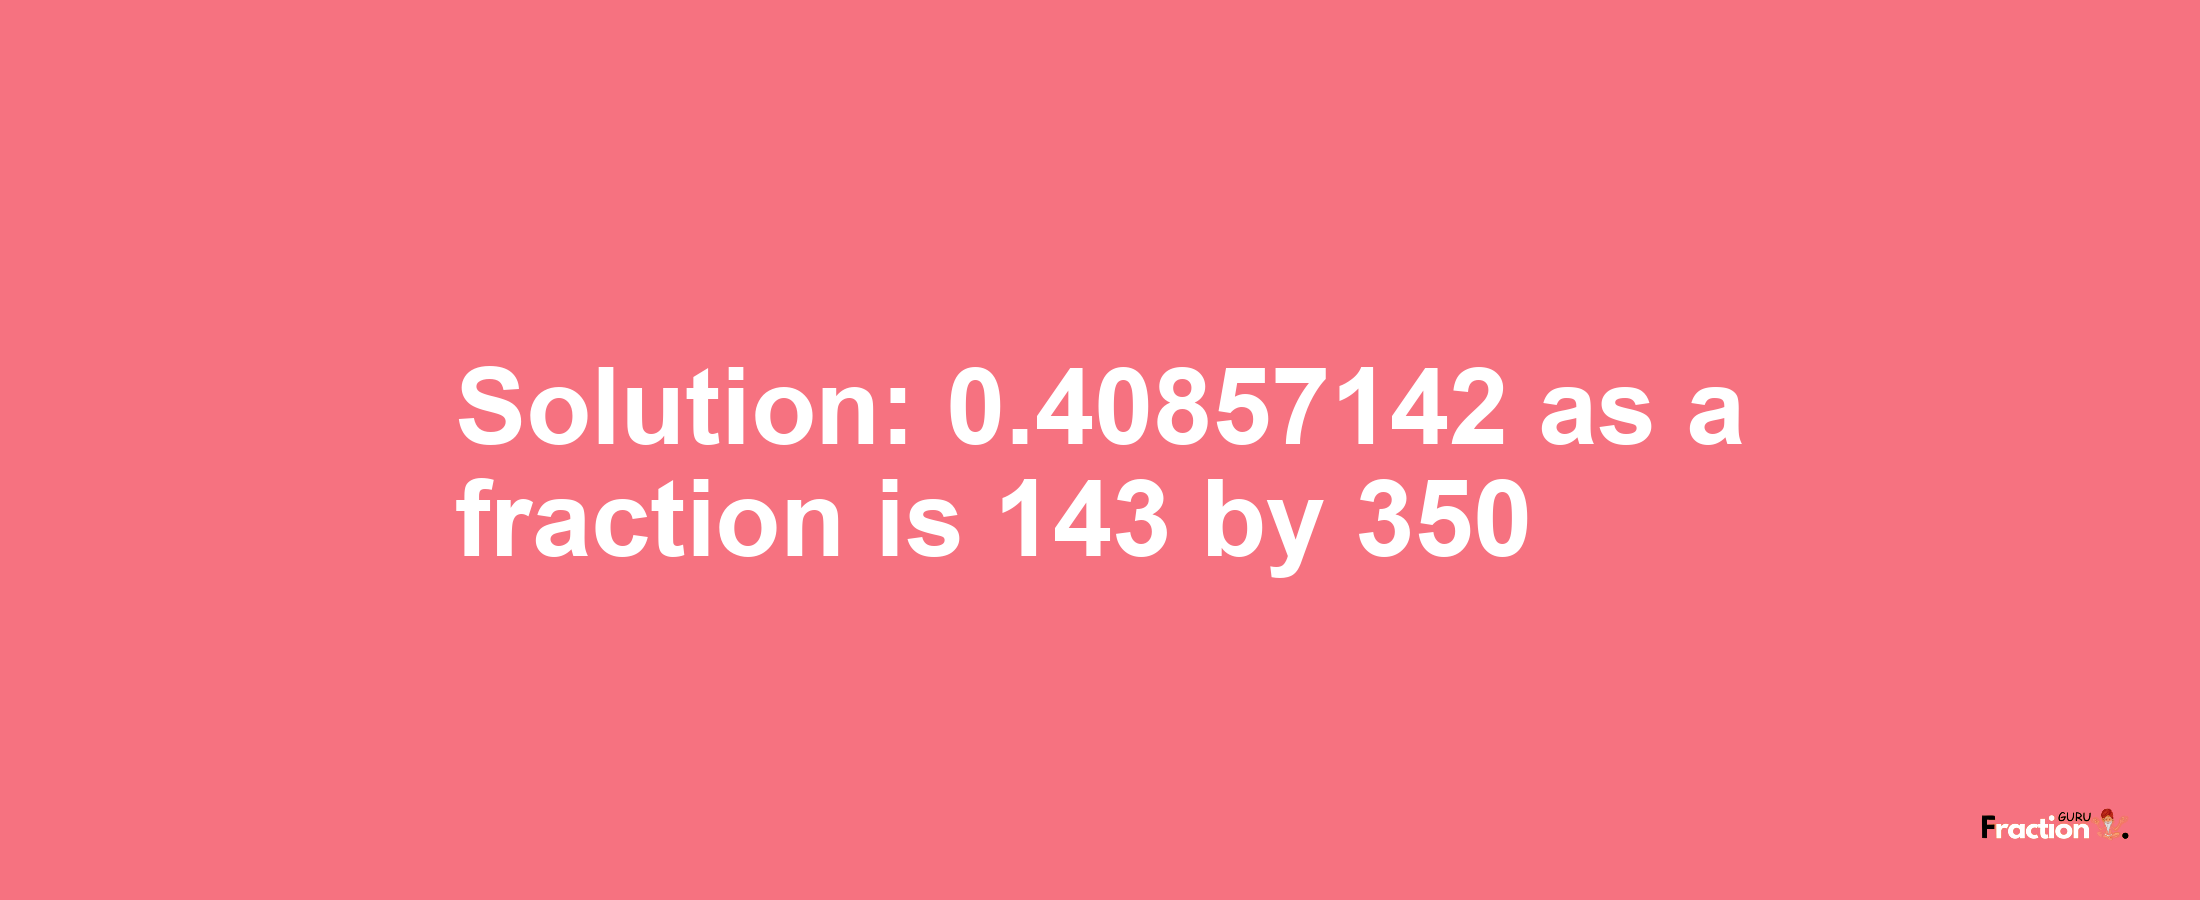 Solution:0.40857142 as a fraction is 143/350